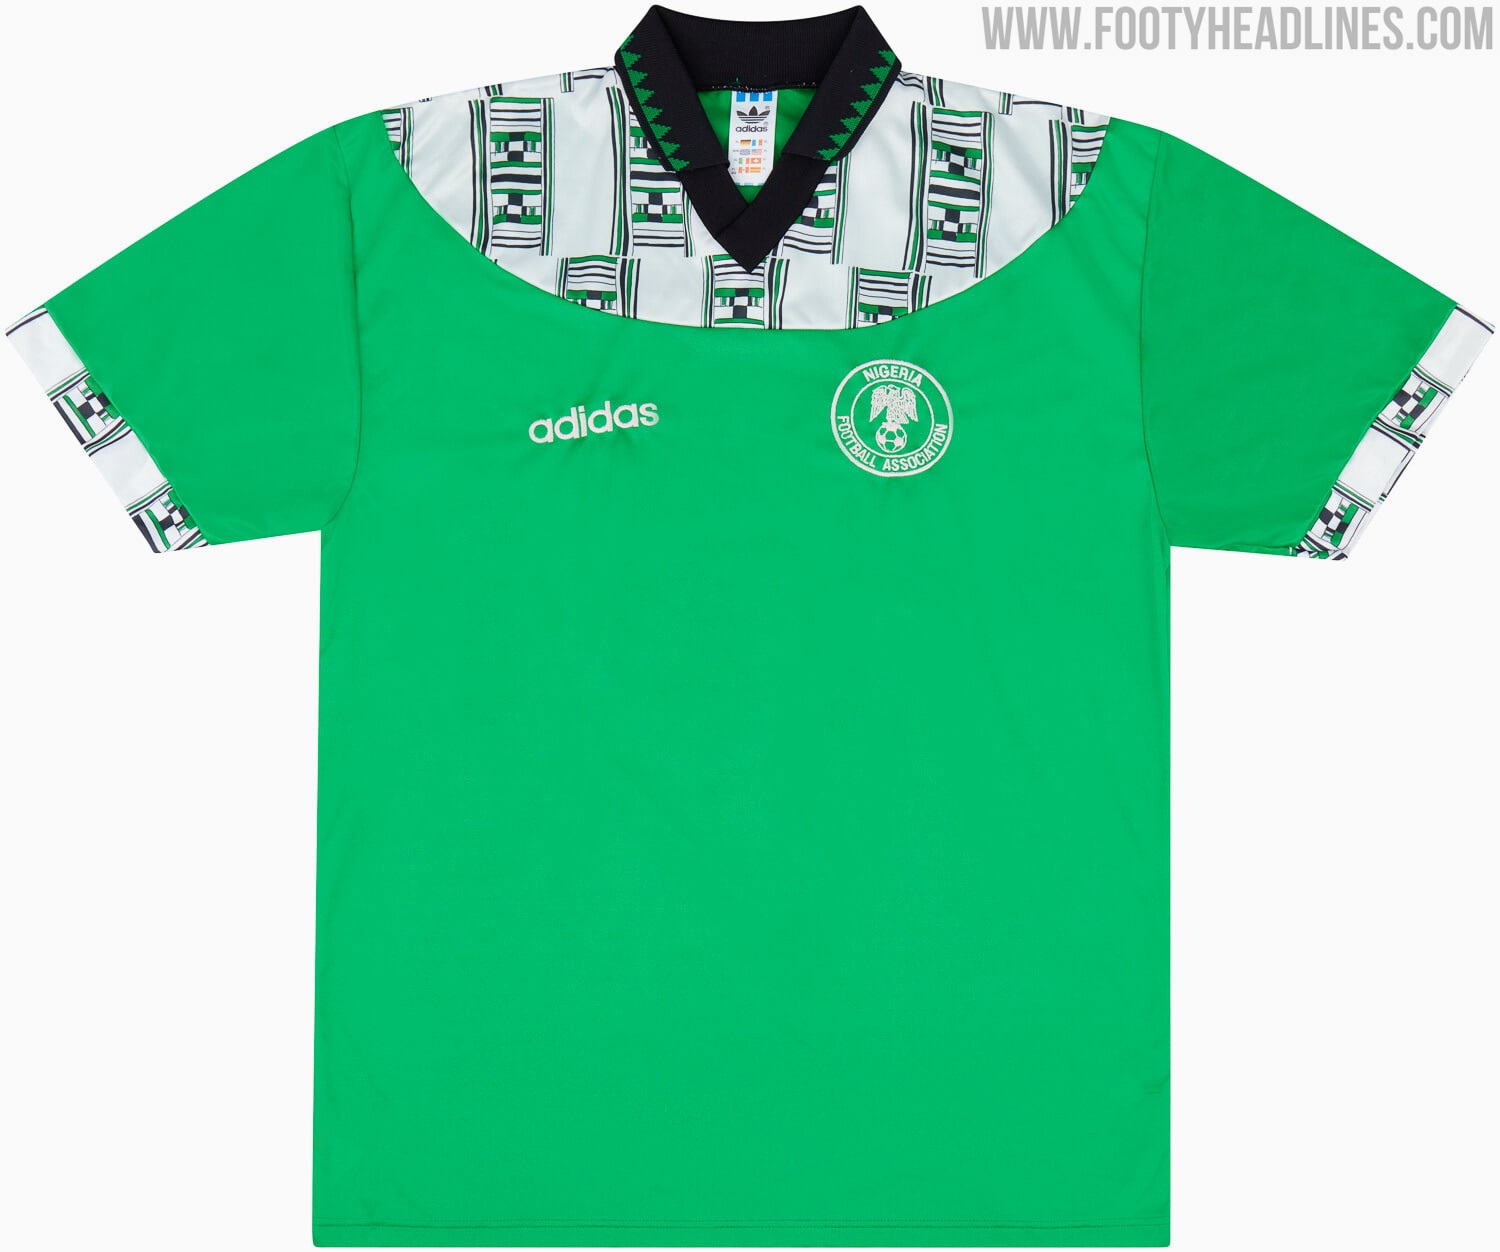 The Shirt That Never Was: Outrageous Adidas 1994 Prototype Kit - Footy Headlines